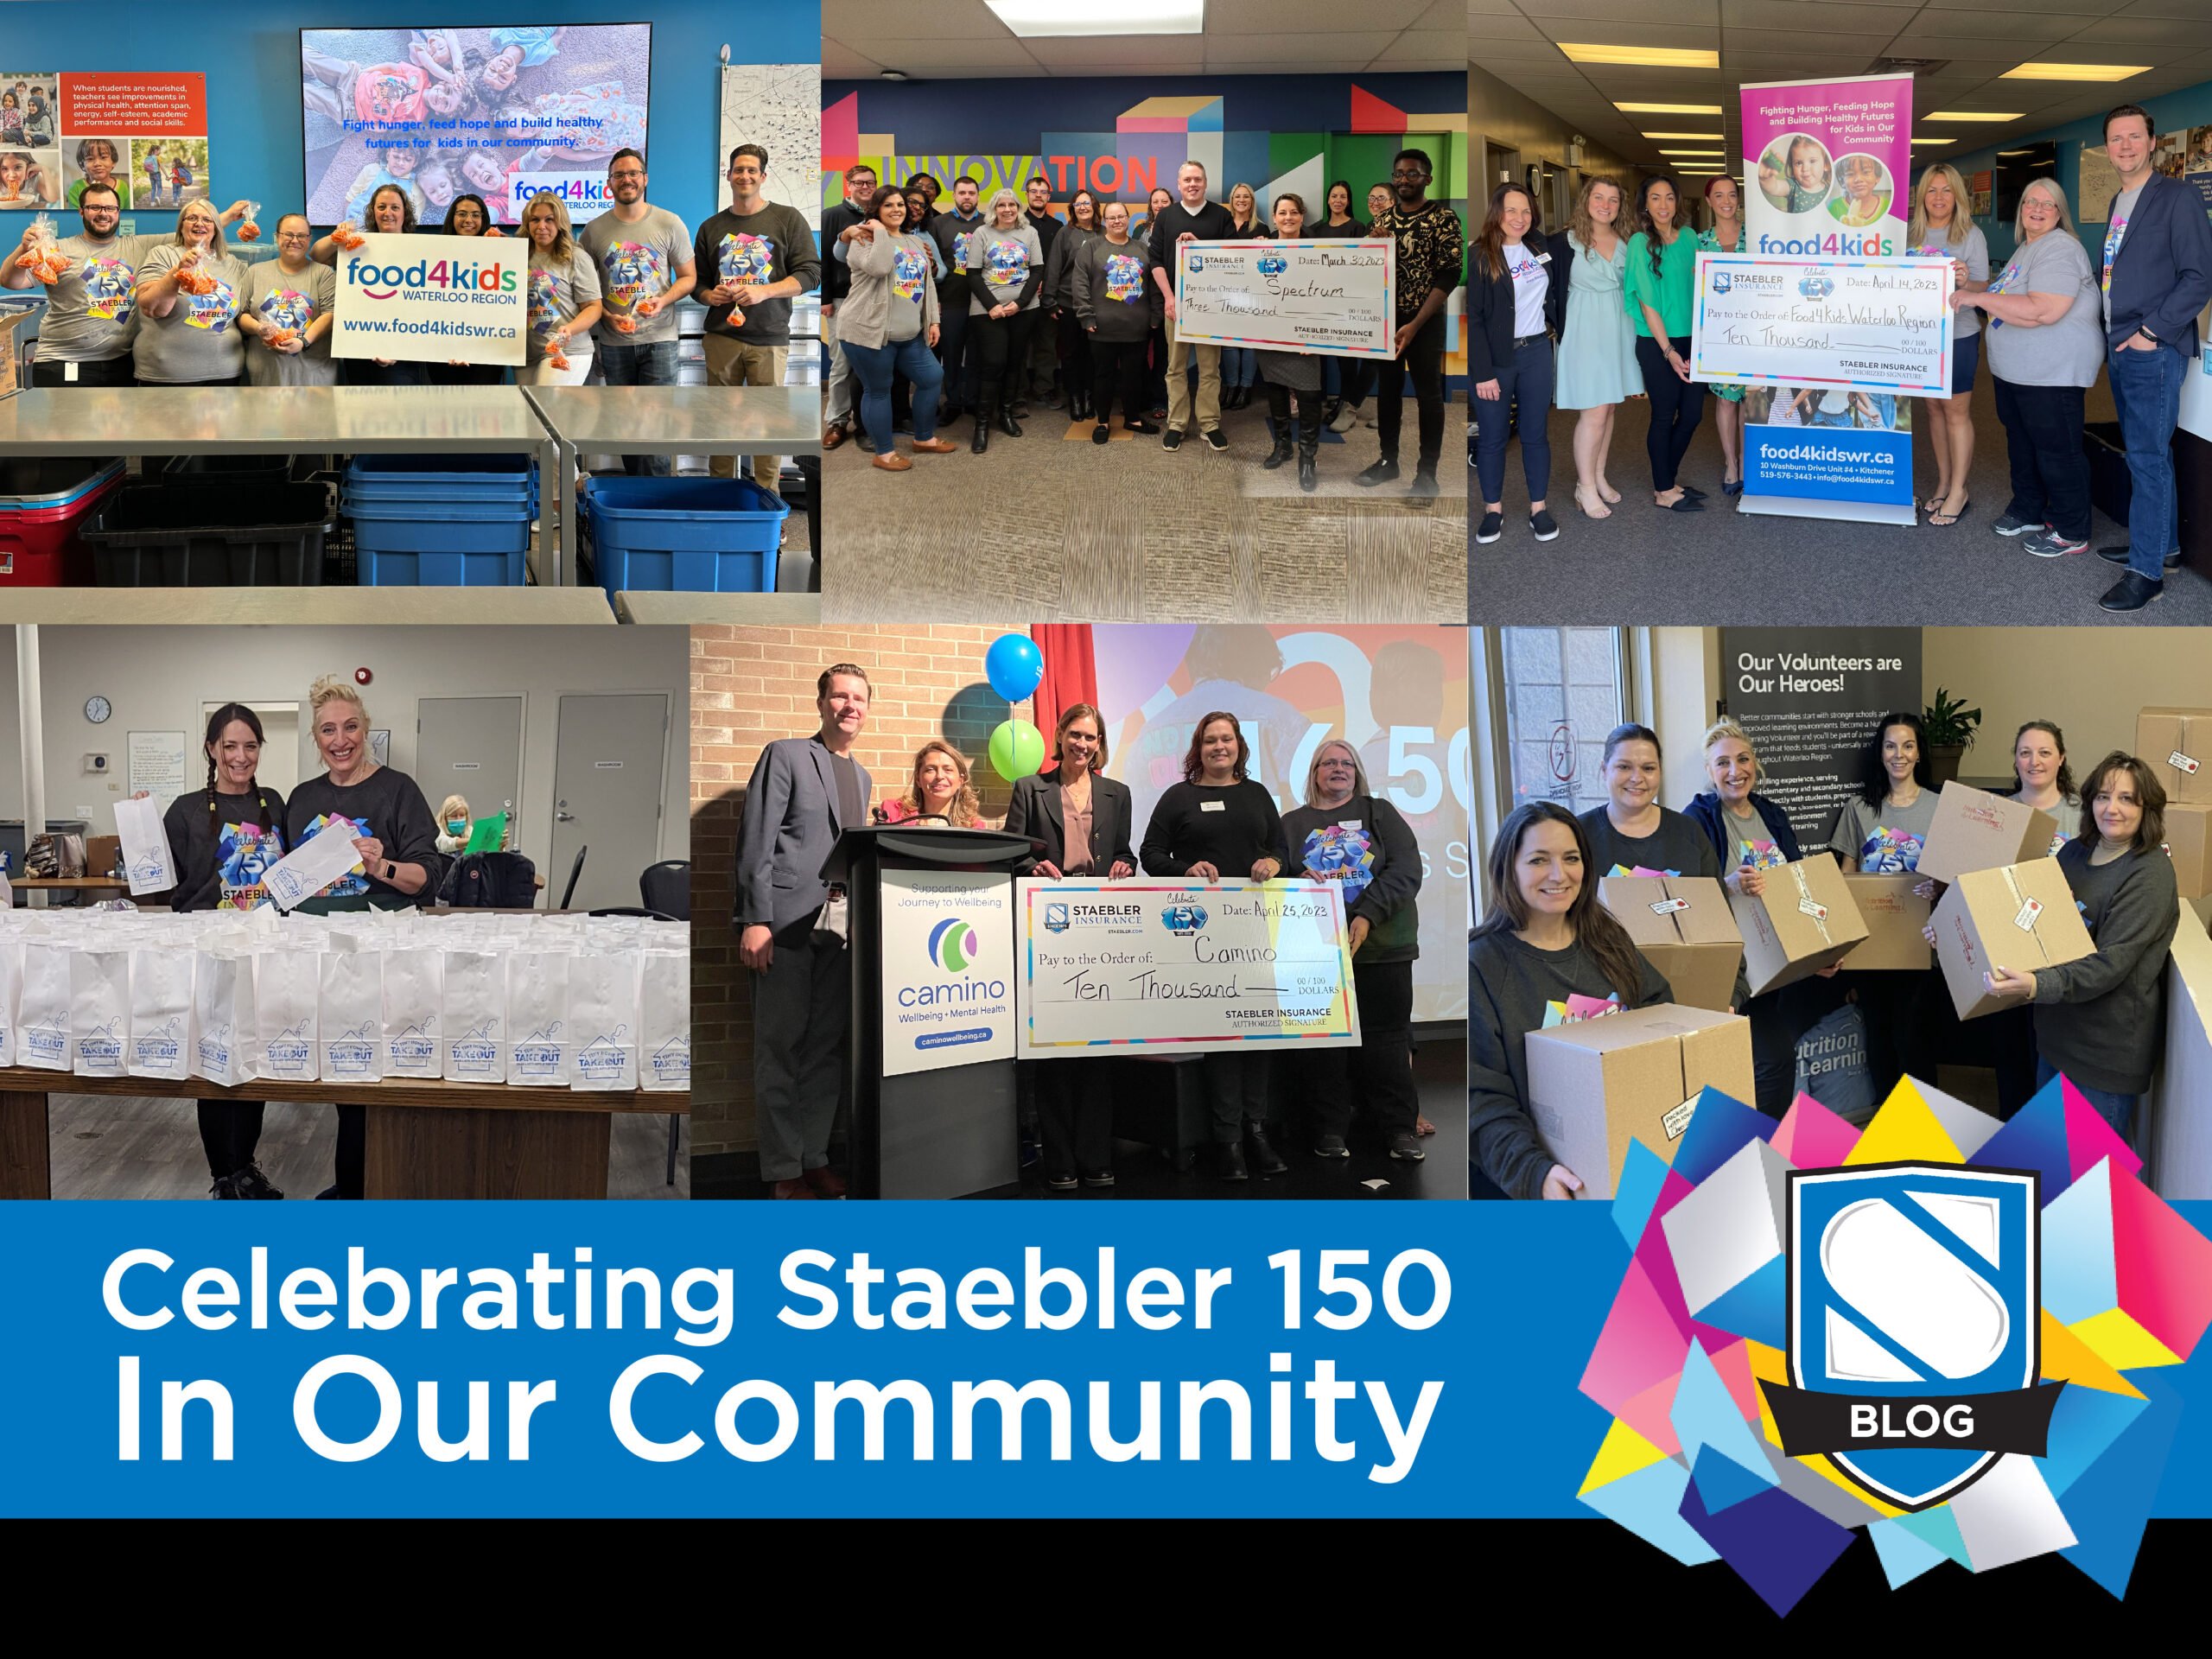 Celebrating our 150th Anniversary by Giving Back and Making an Impact